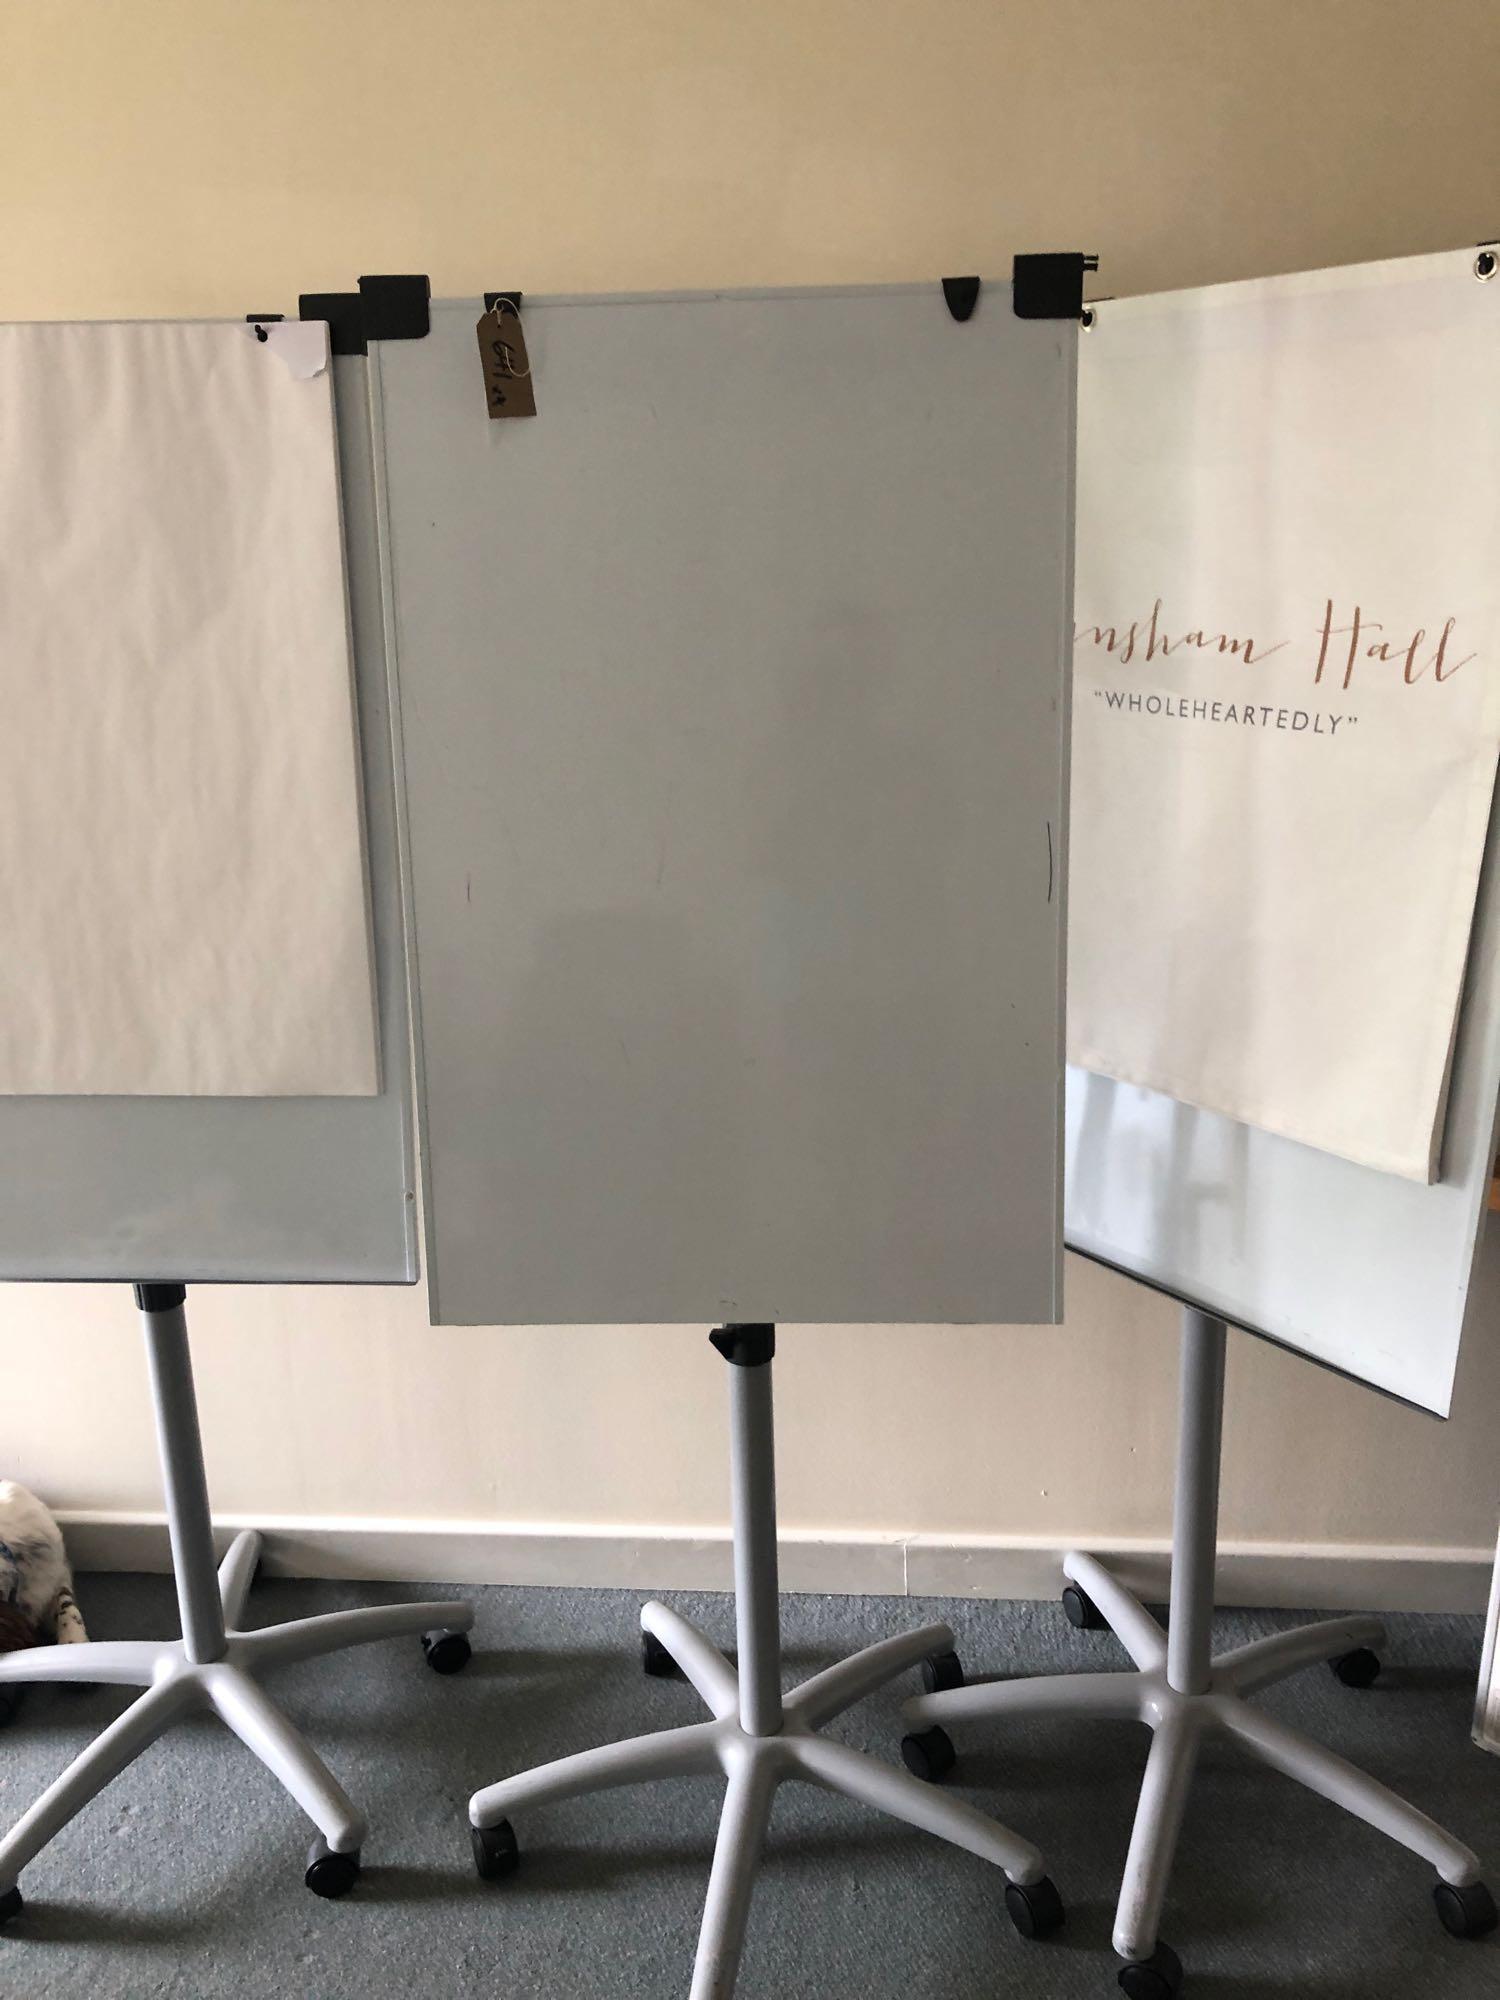 3 x Mobile Whiteboard/Flipchart Adjustable Height Stands One Times Wall Mounted Whiteboard - Image 2 of 3